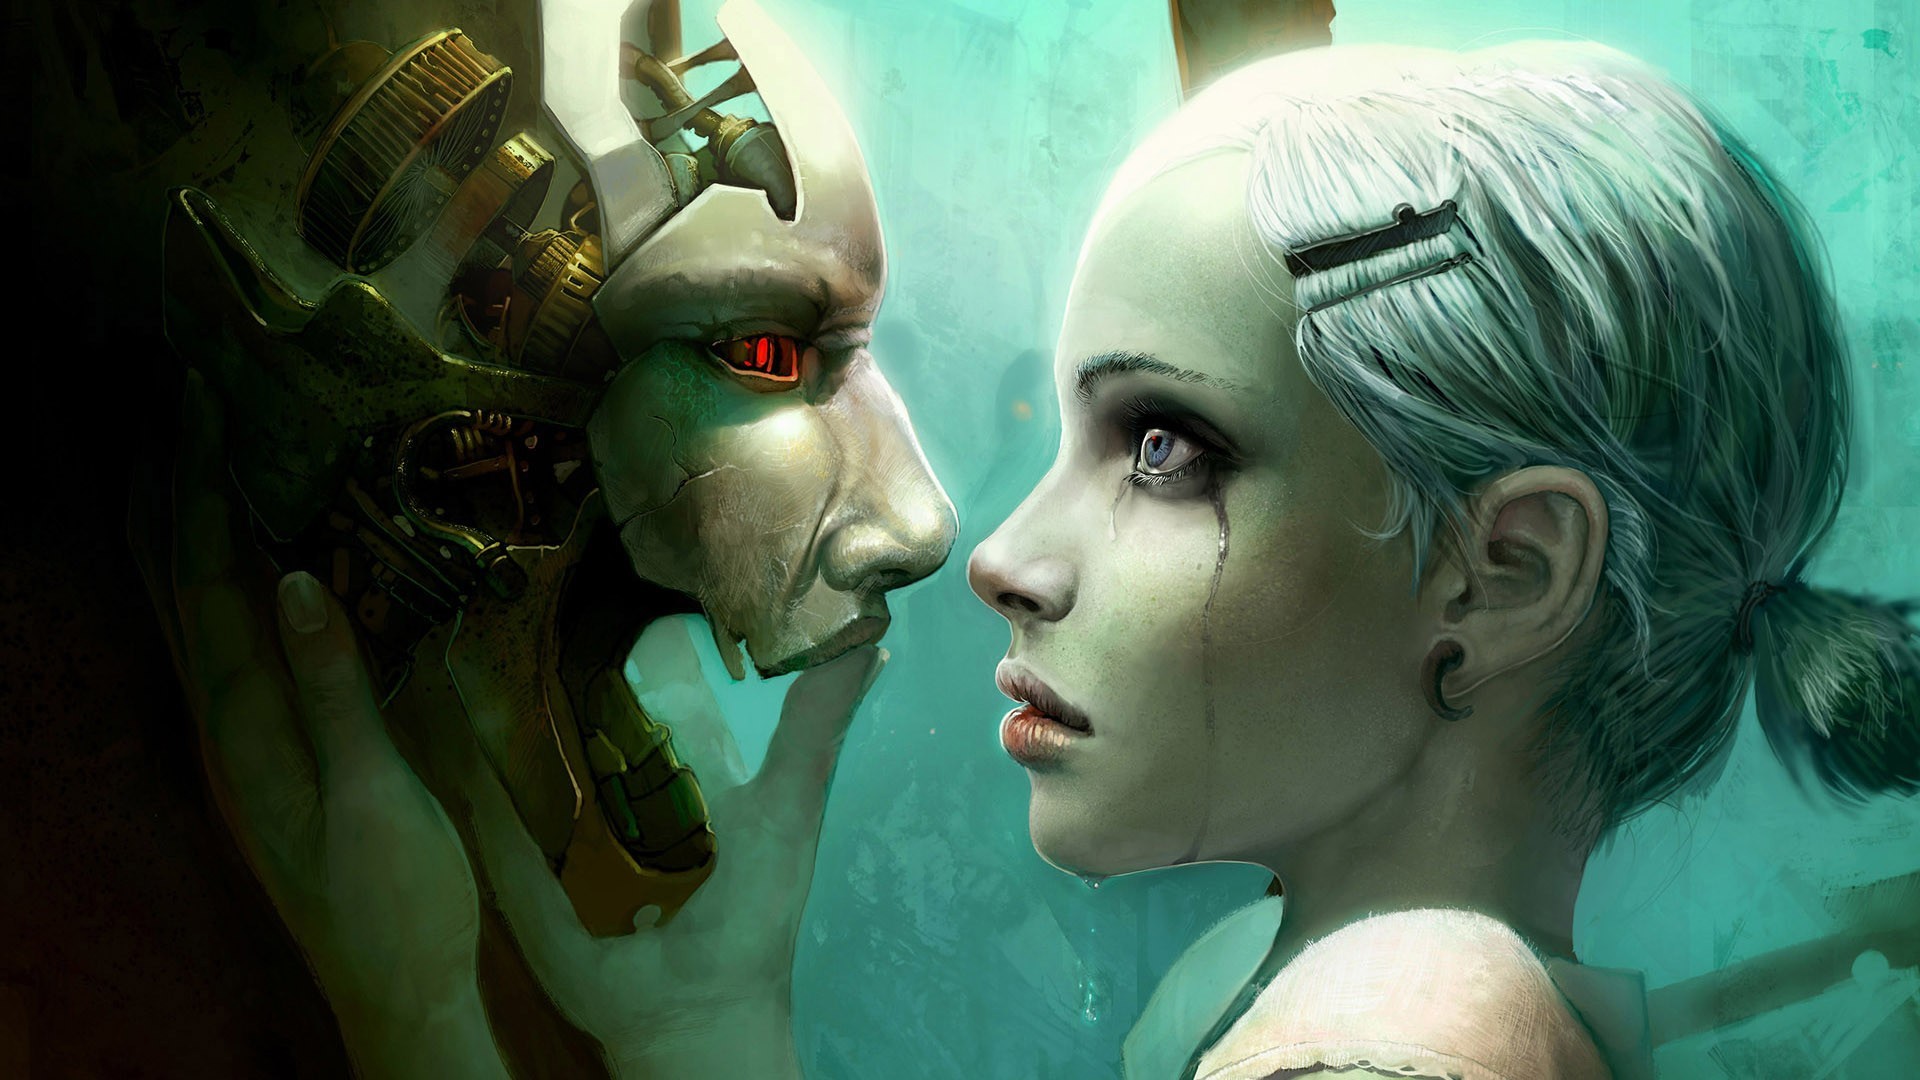 General 1920x1080 women futuristic robot space science fiction tears artwork fantasy girl science fiction women machine red eyes face profile